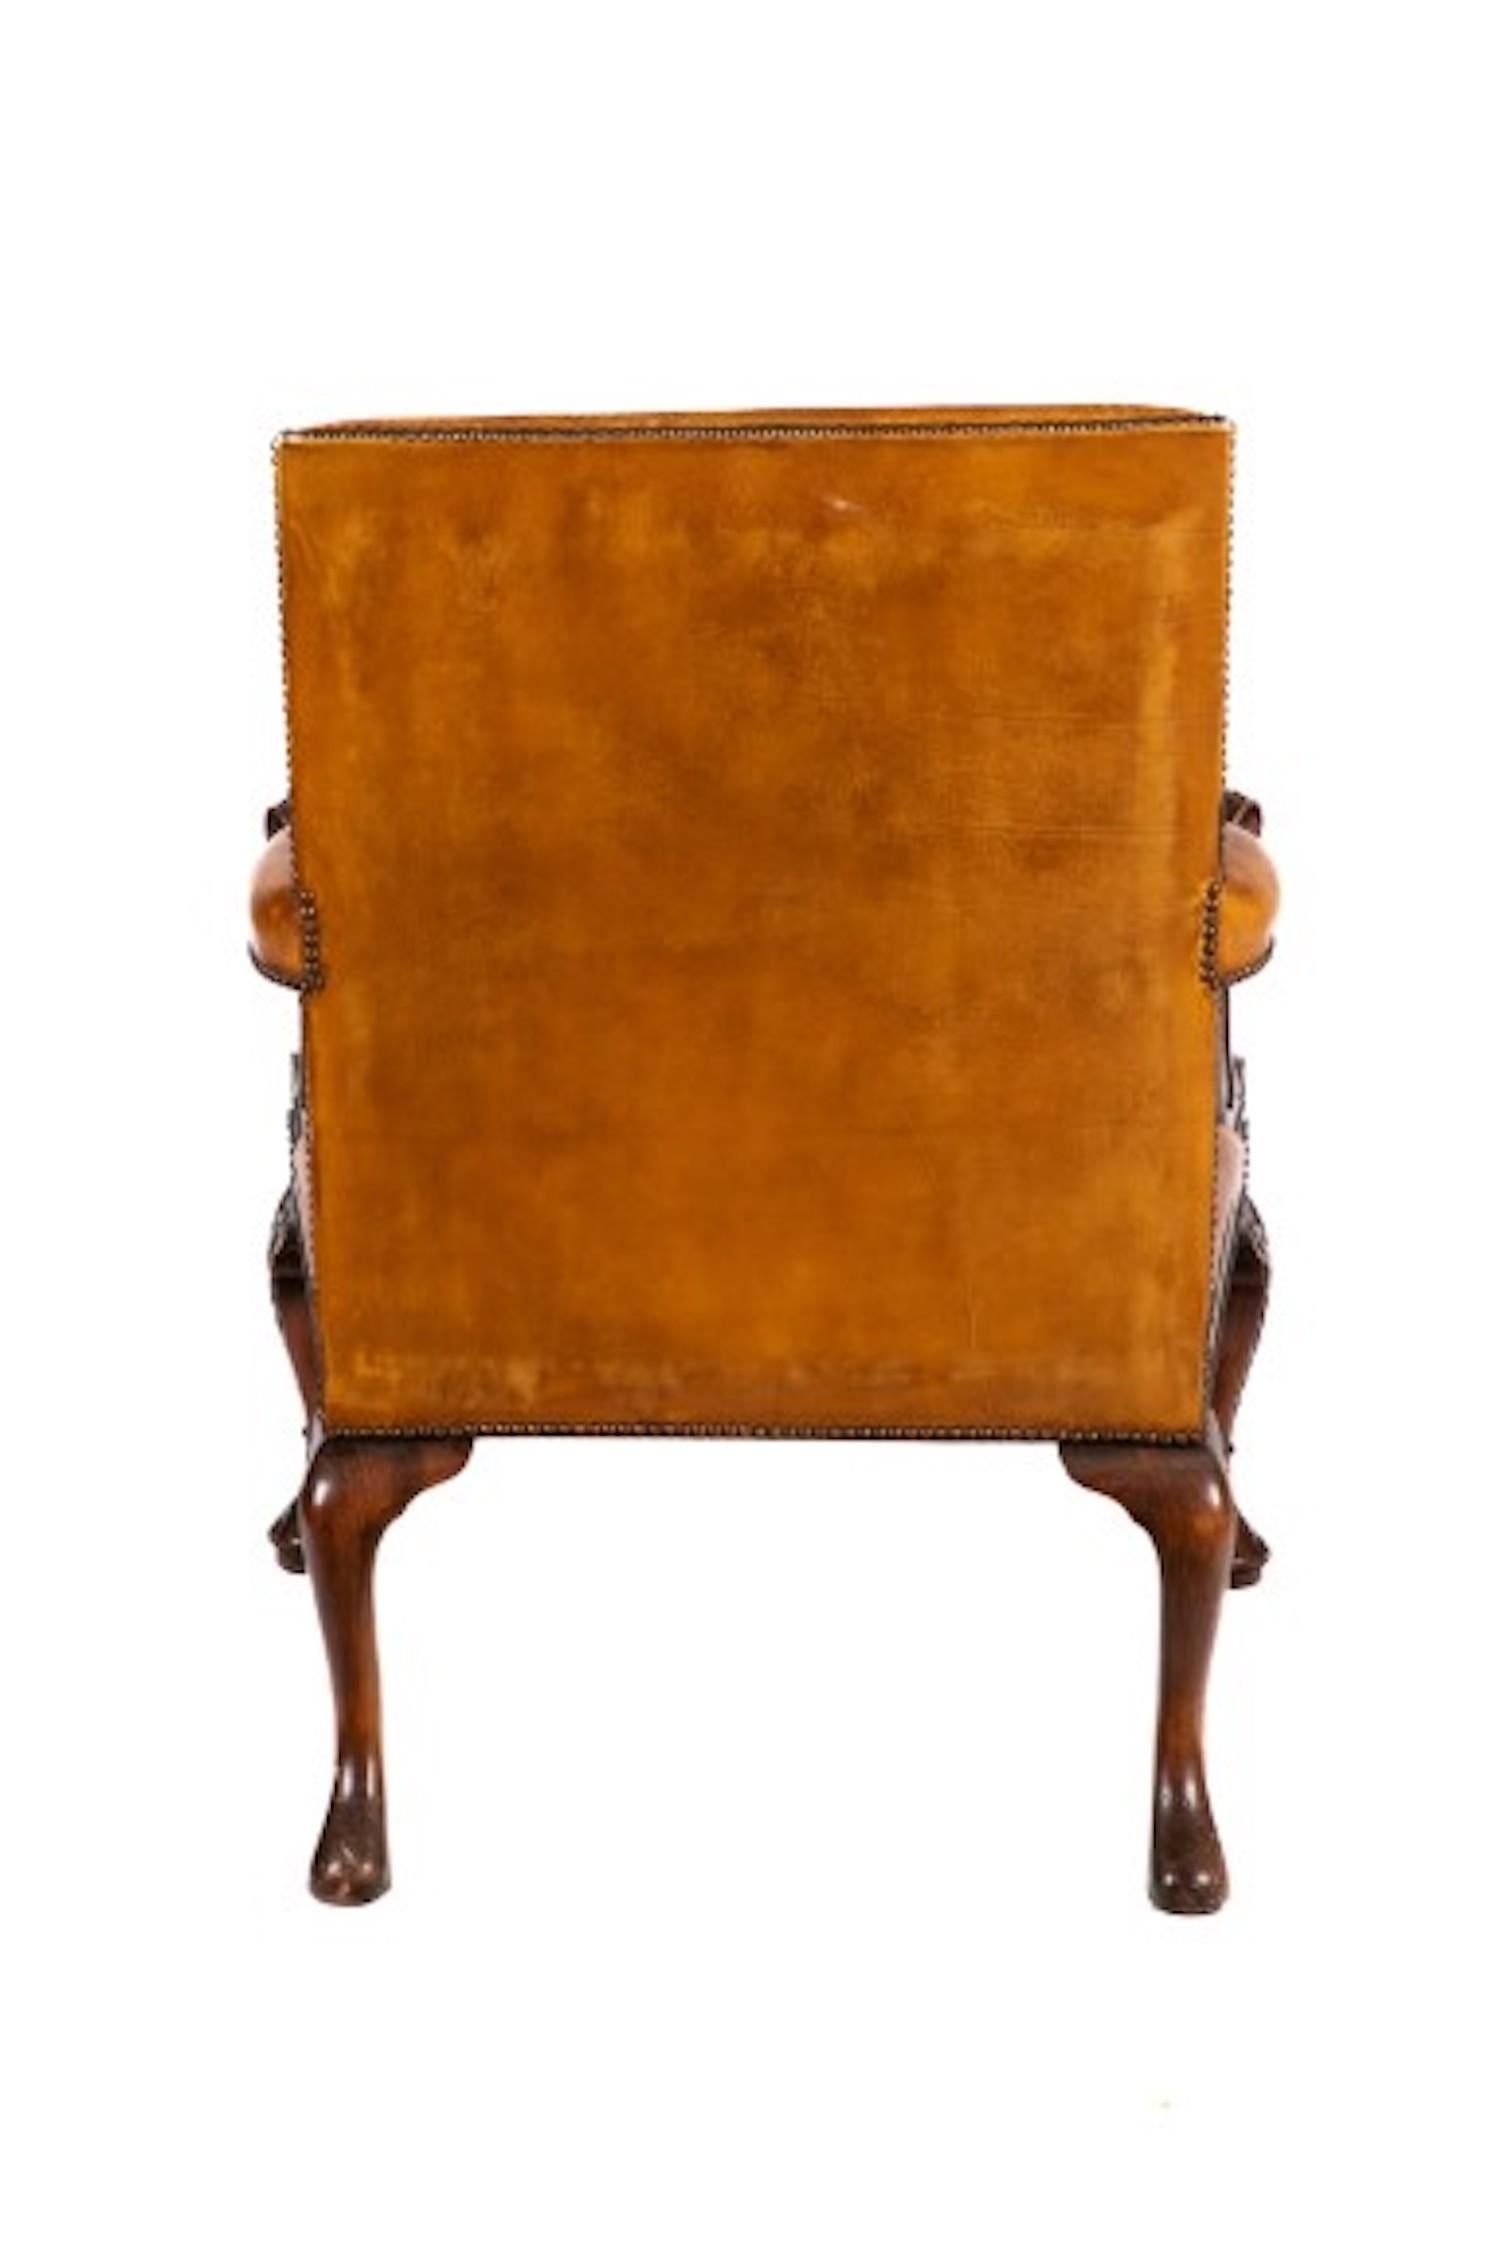 Early 20th Century Gainsborough Style Cognac Colored Leather and Mahogany Armchair 